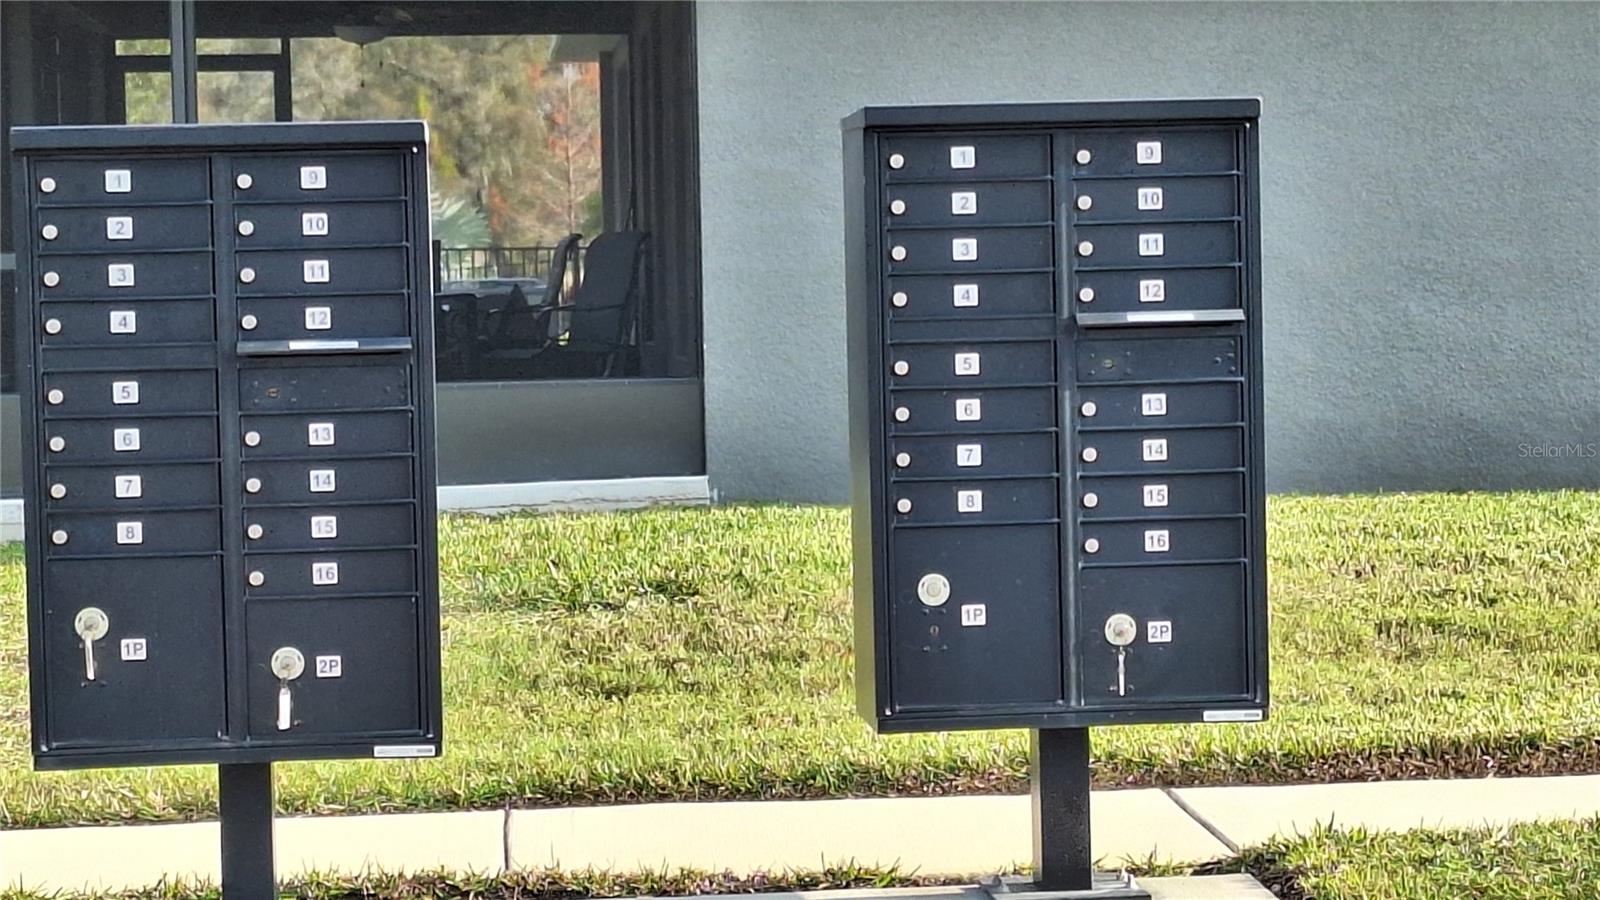 Mail boxes are two doors away